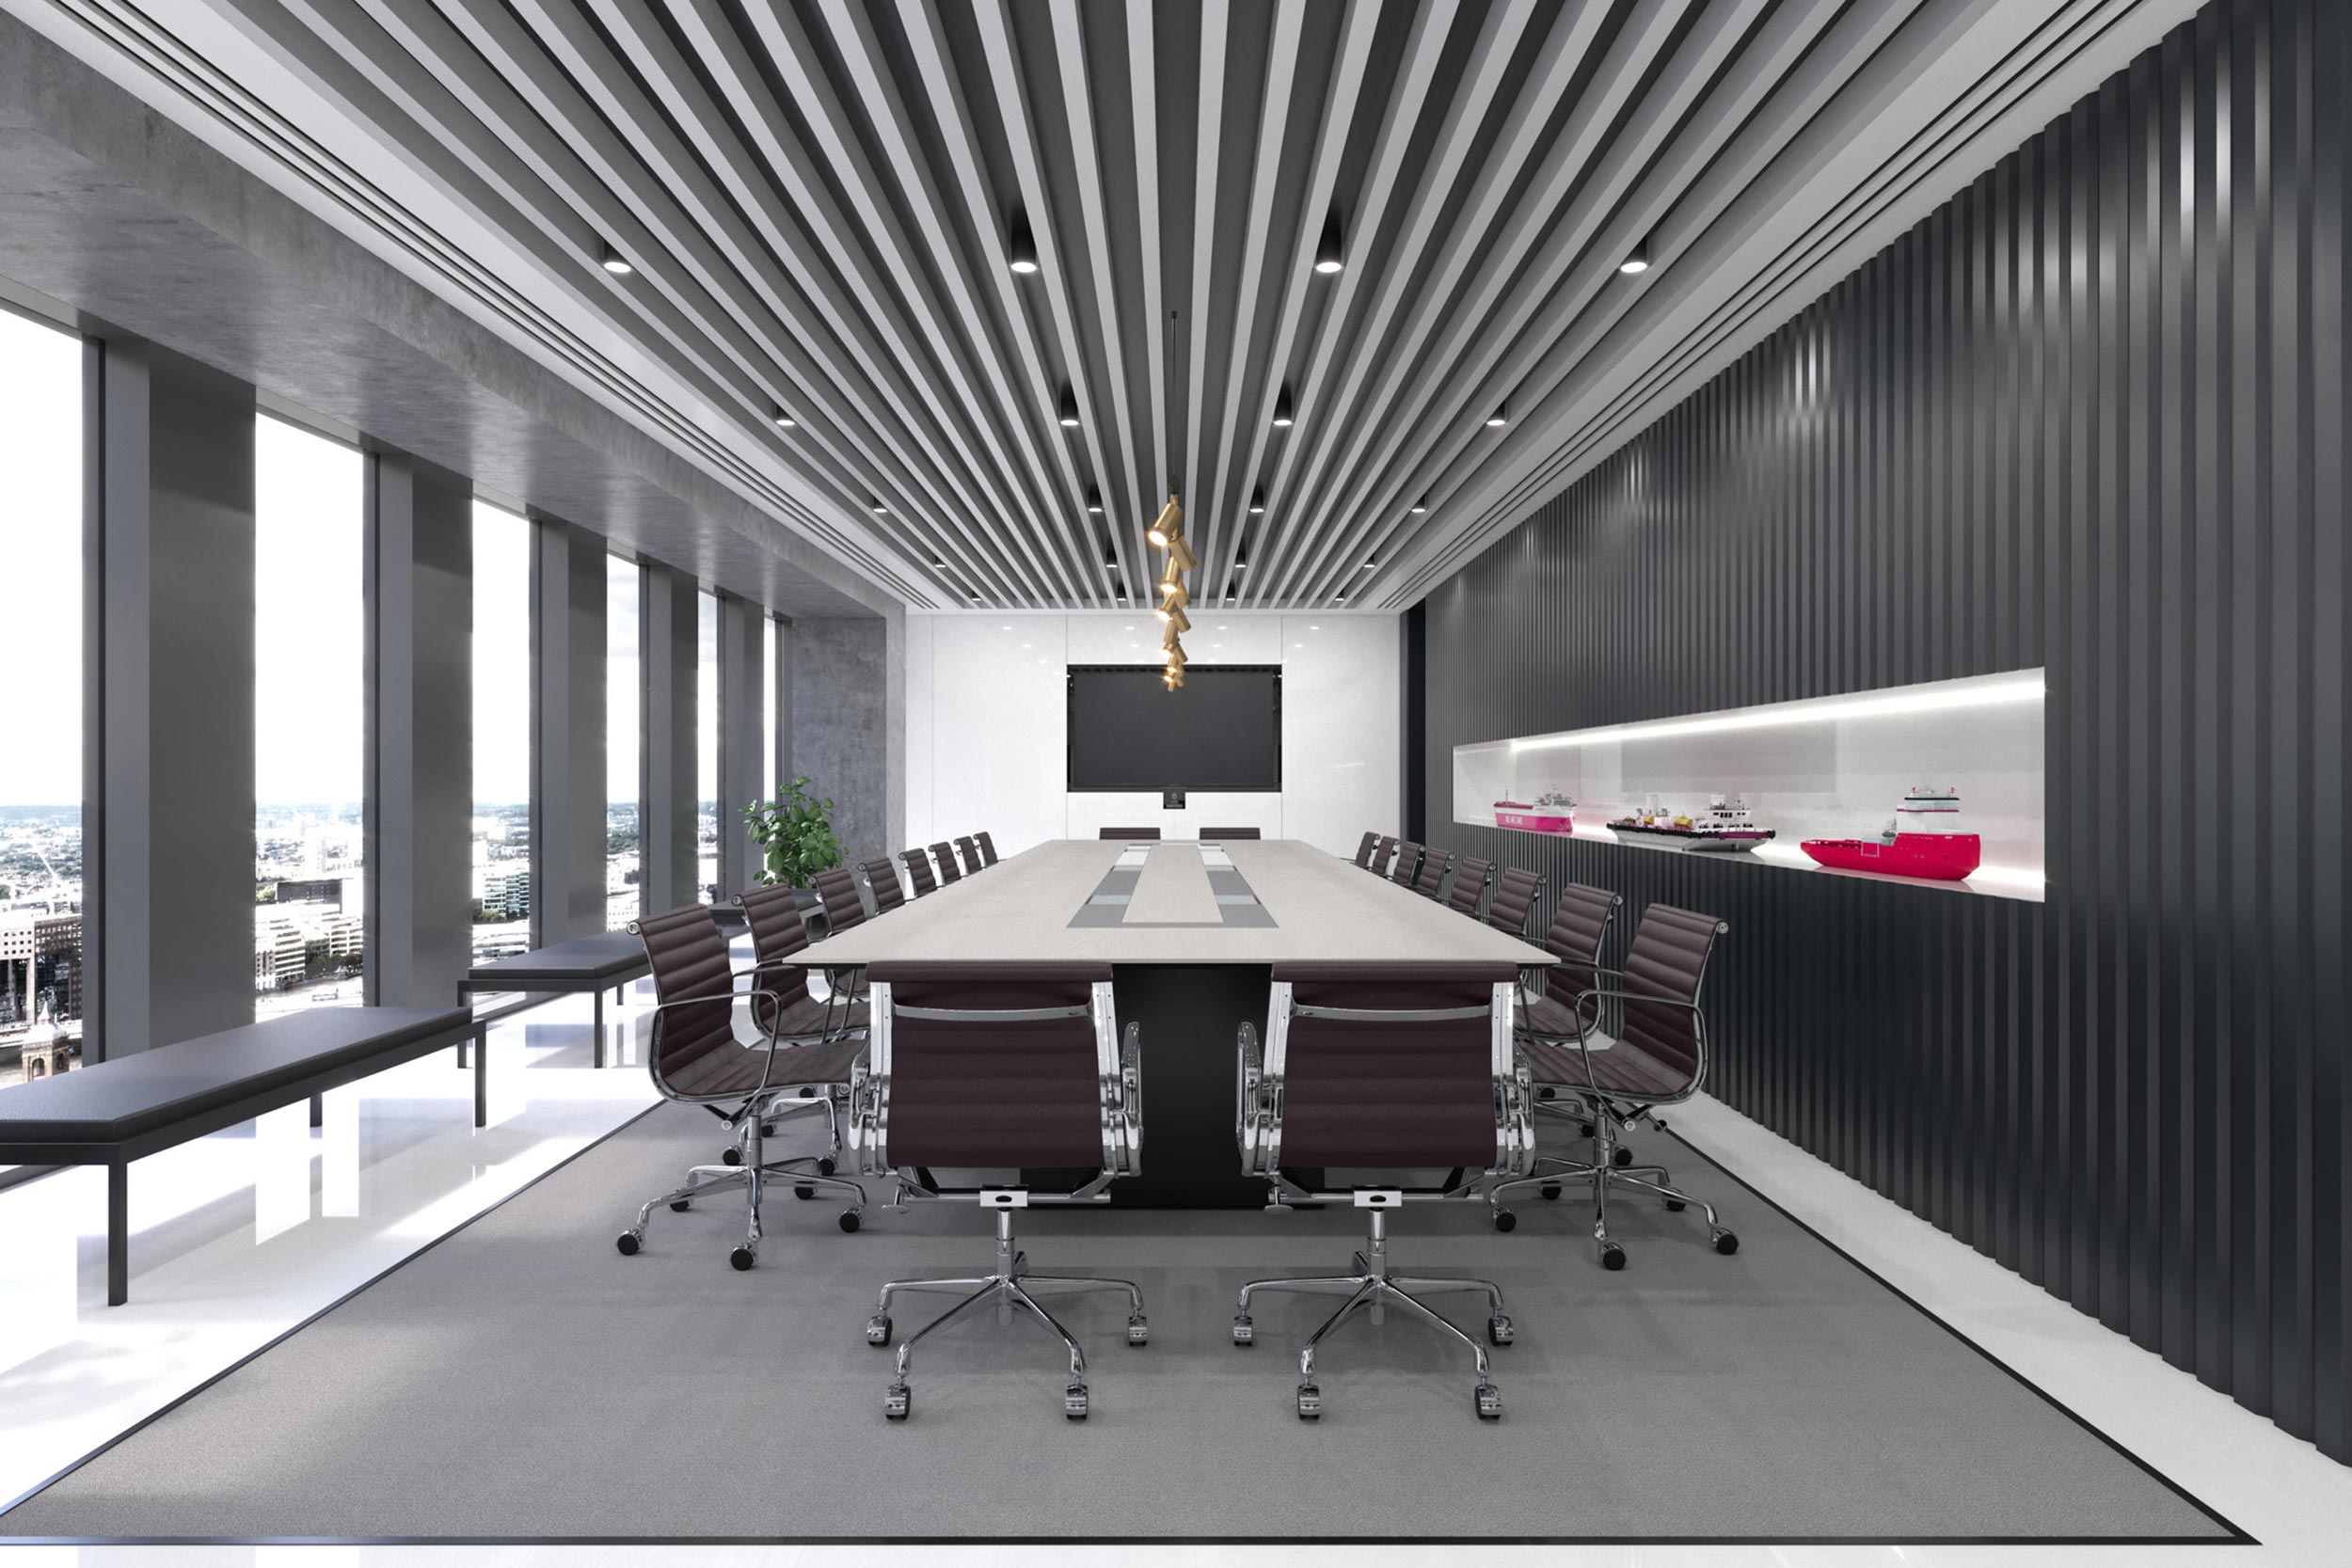 Ocean Network Express Commercial Property Development Office Interior Designer CGI Concept Visual by Unit4, London